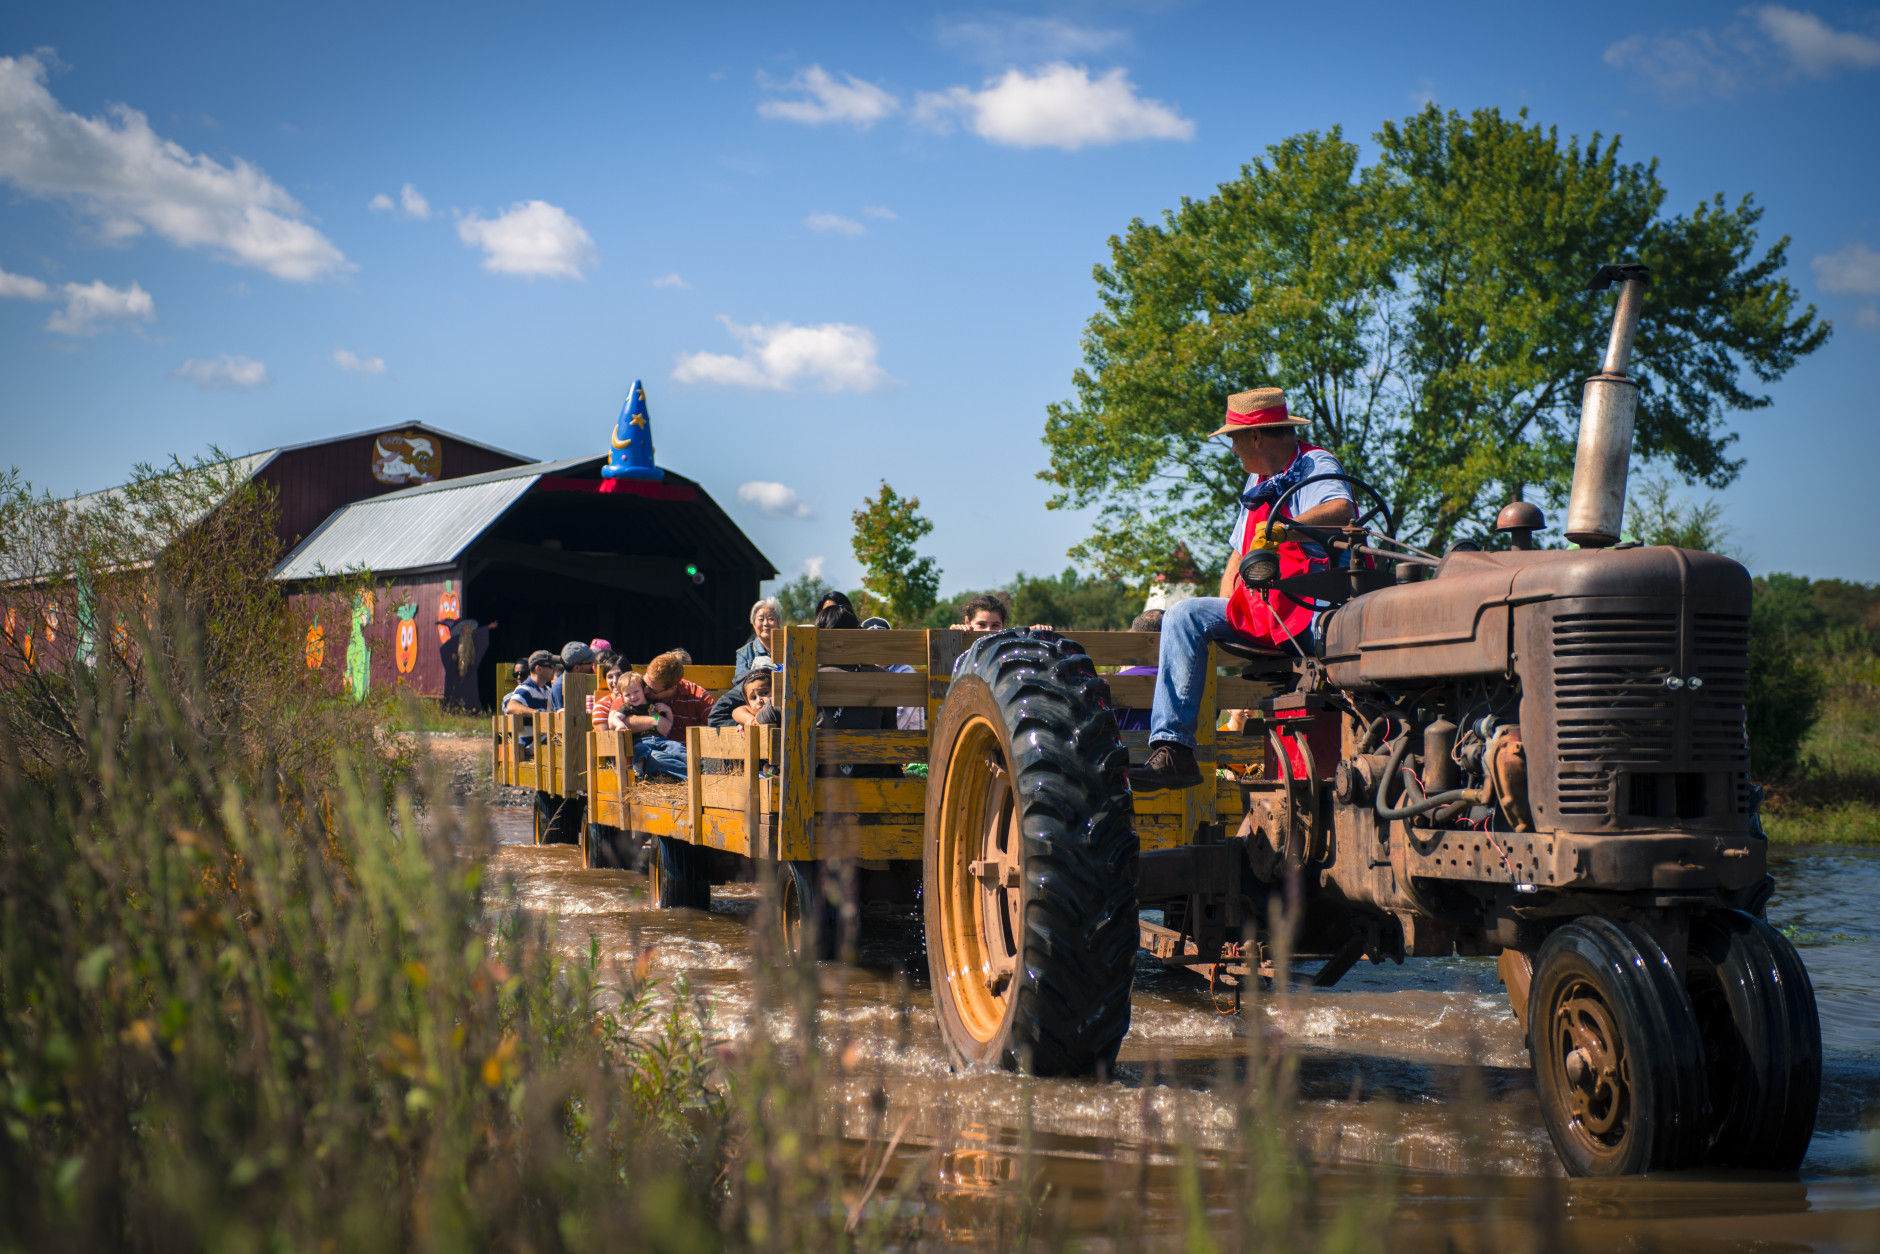 <p>The fall festival at <a href="https://coxfarms.com/fall-festival/" target="_blank" rel="noopener">Cox Farms</a> in Centreville, Virginia, offers hayrides, their &#8220;corny conundrum&#8221; attraction and giant slides. It runs from Sept. 25 through Nov. 7.</p>
<p>There&#8217;s also live music, a nature trail and a goat village. Food fun is a plenty, as well, including apple cider doughnuts and farm-smoked barbecue. And there are plenty of pumpkins, of all sizes, to purchase.</p>
